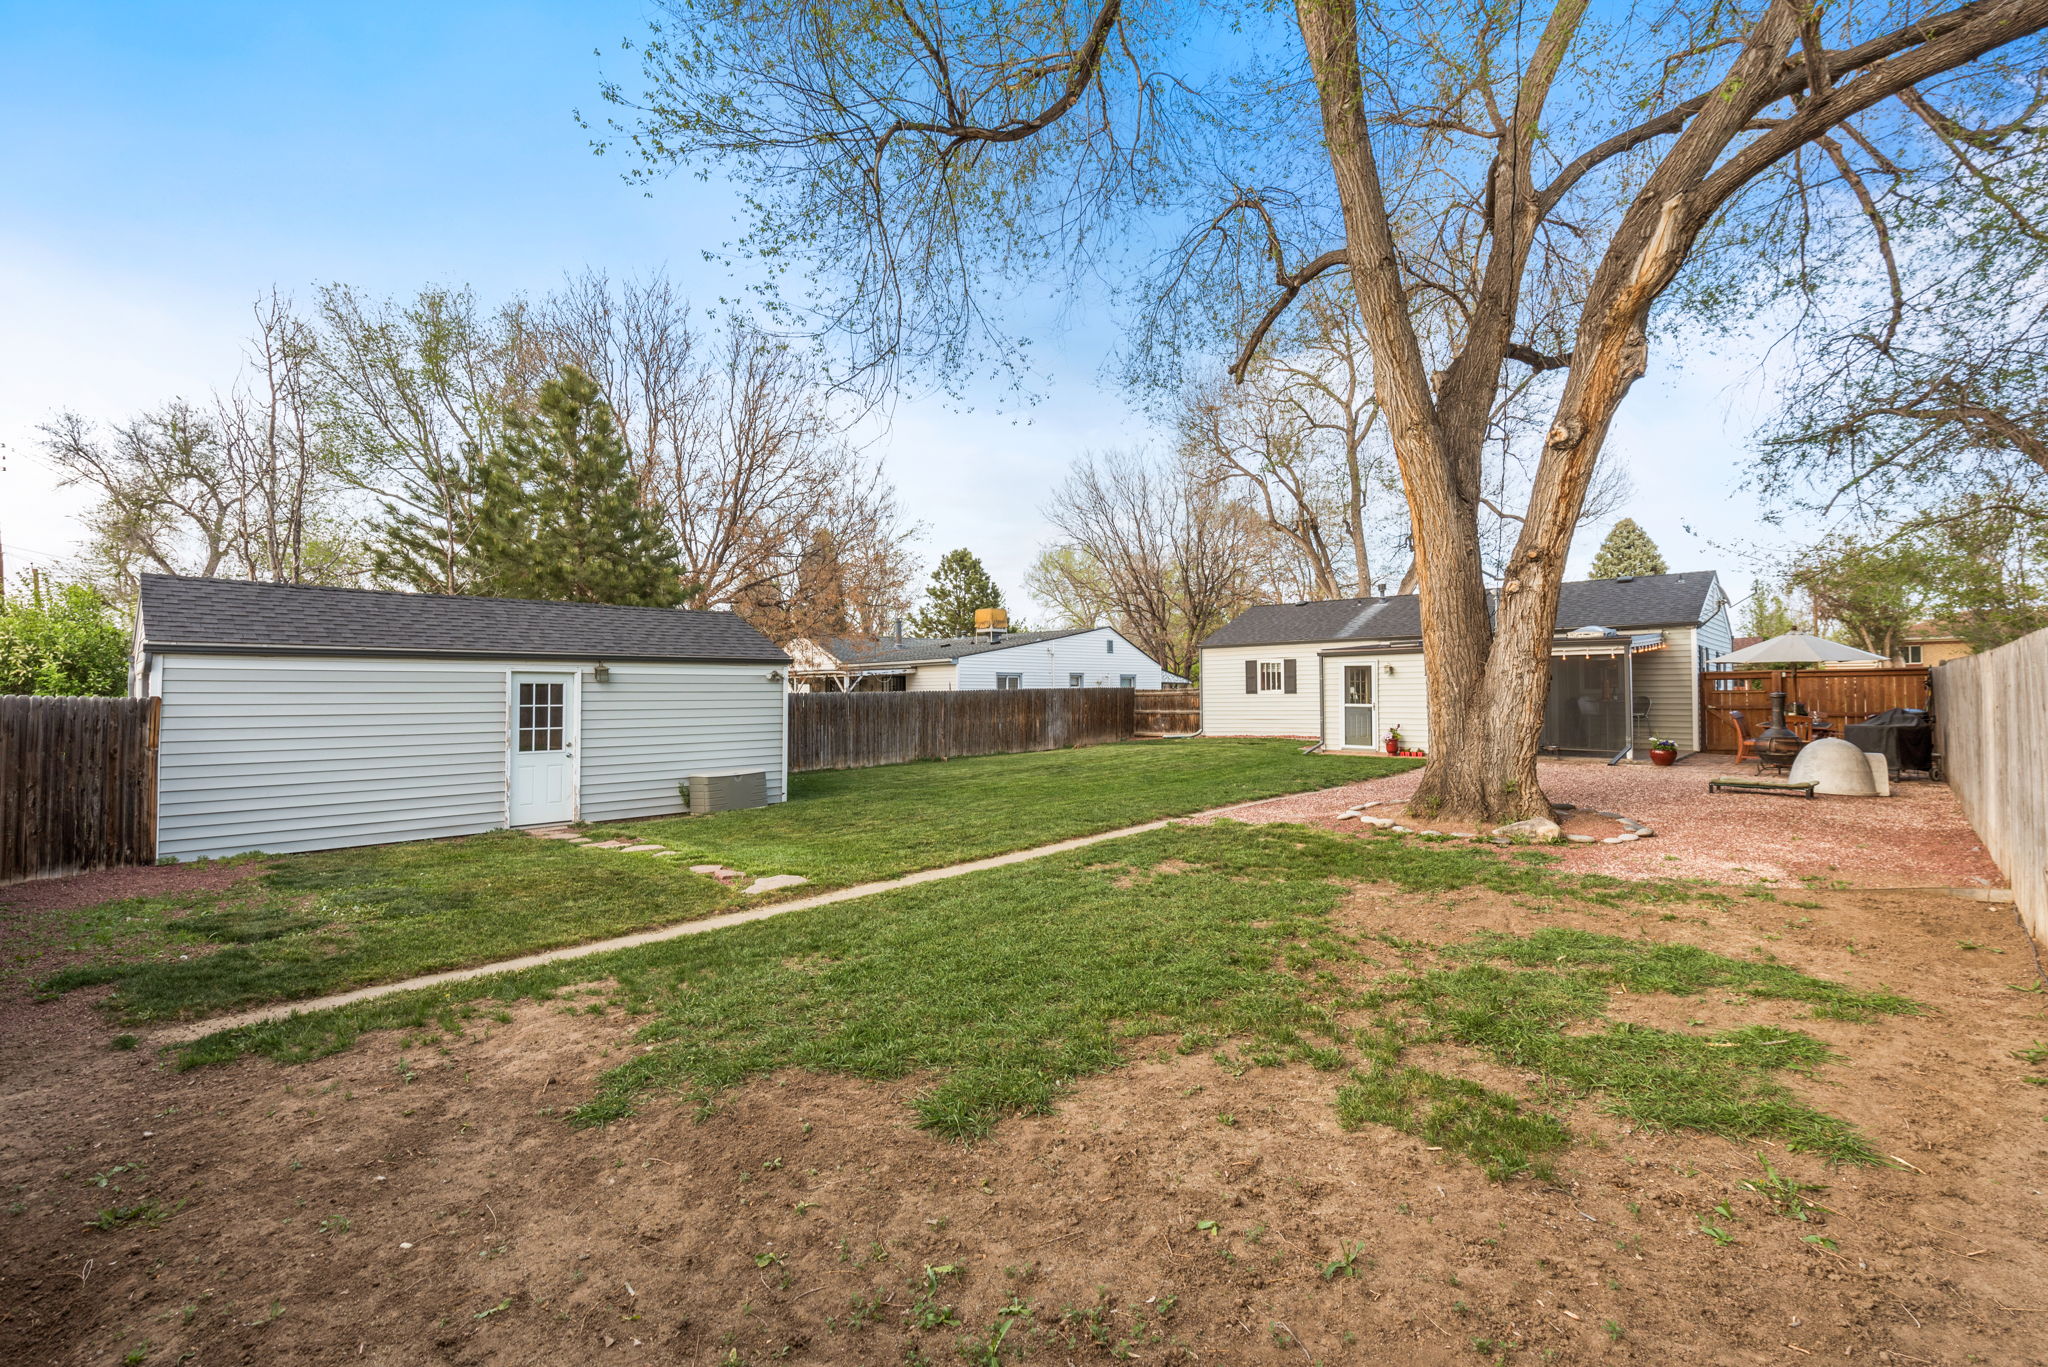  3237 S Franklin St, Englewood, CO 80113, US Photo 26